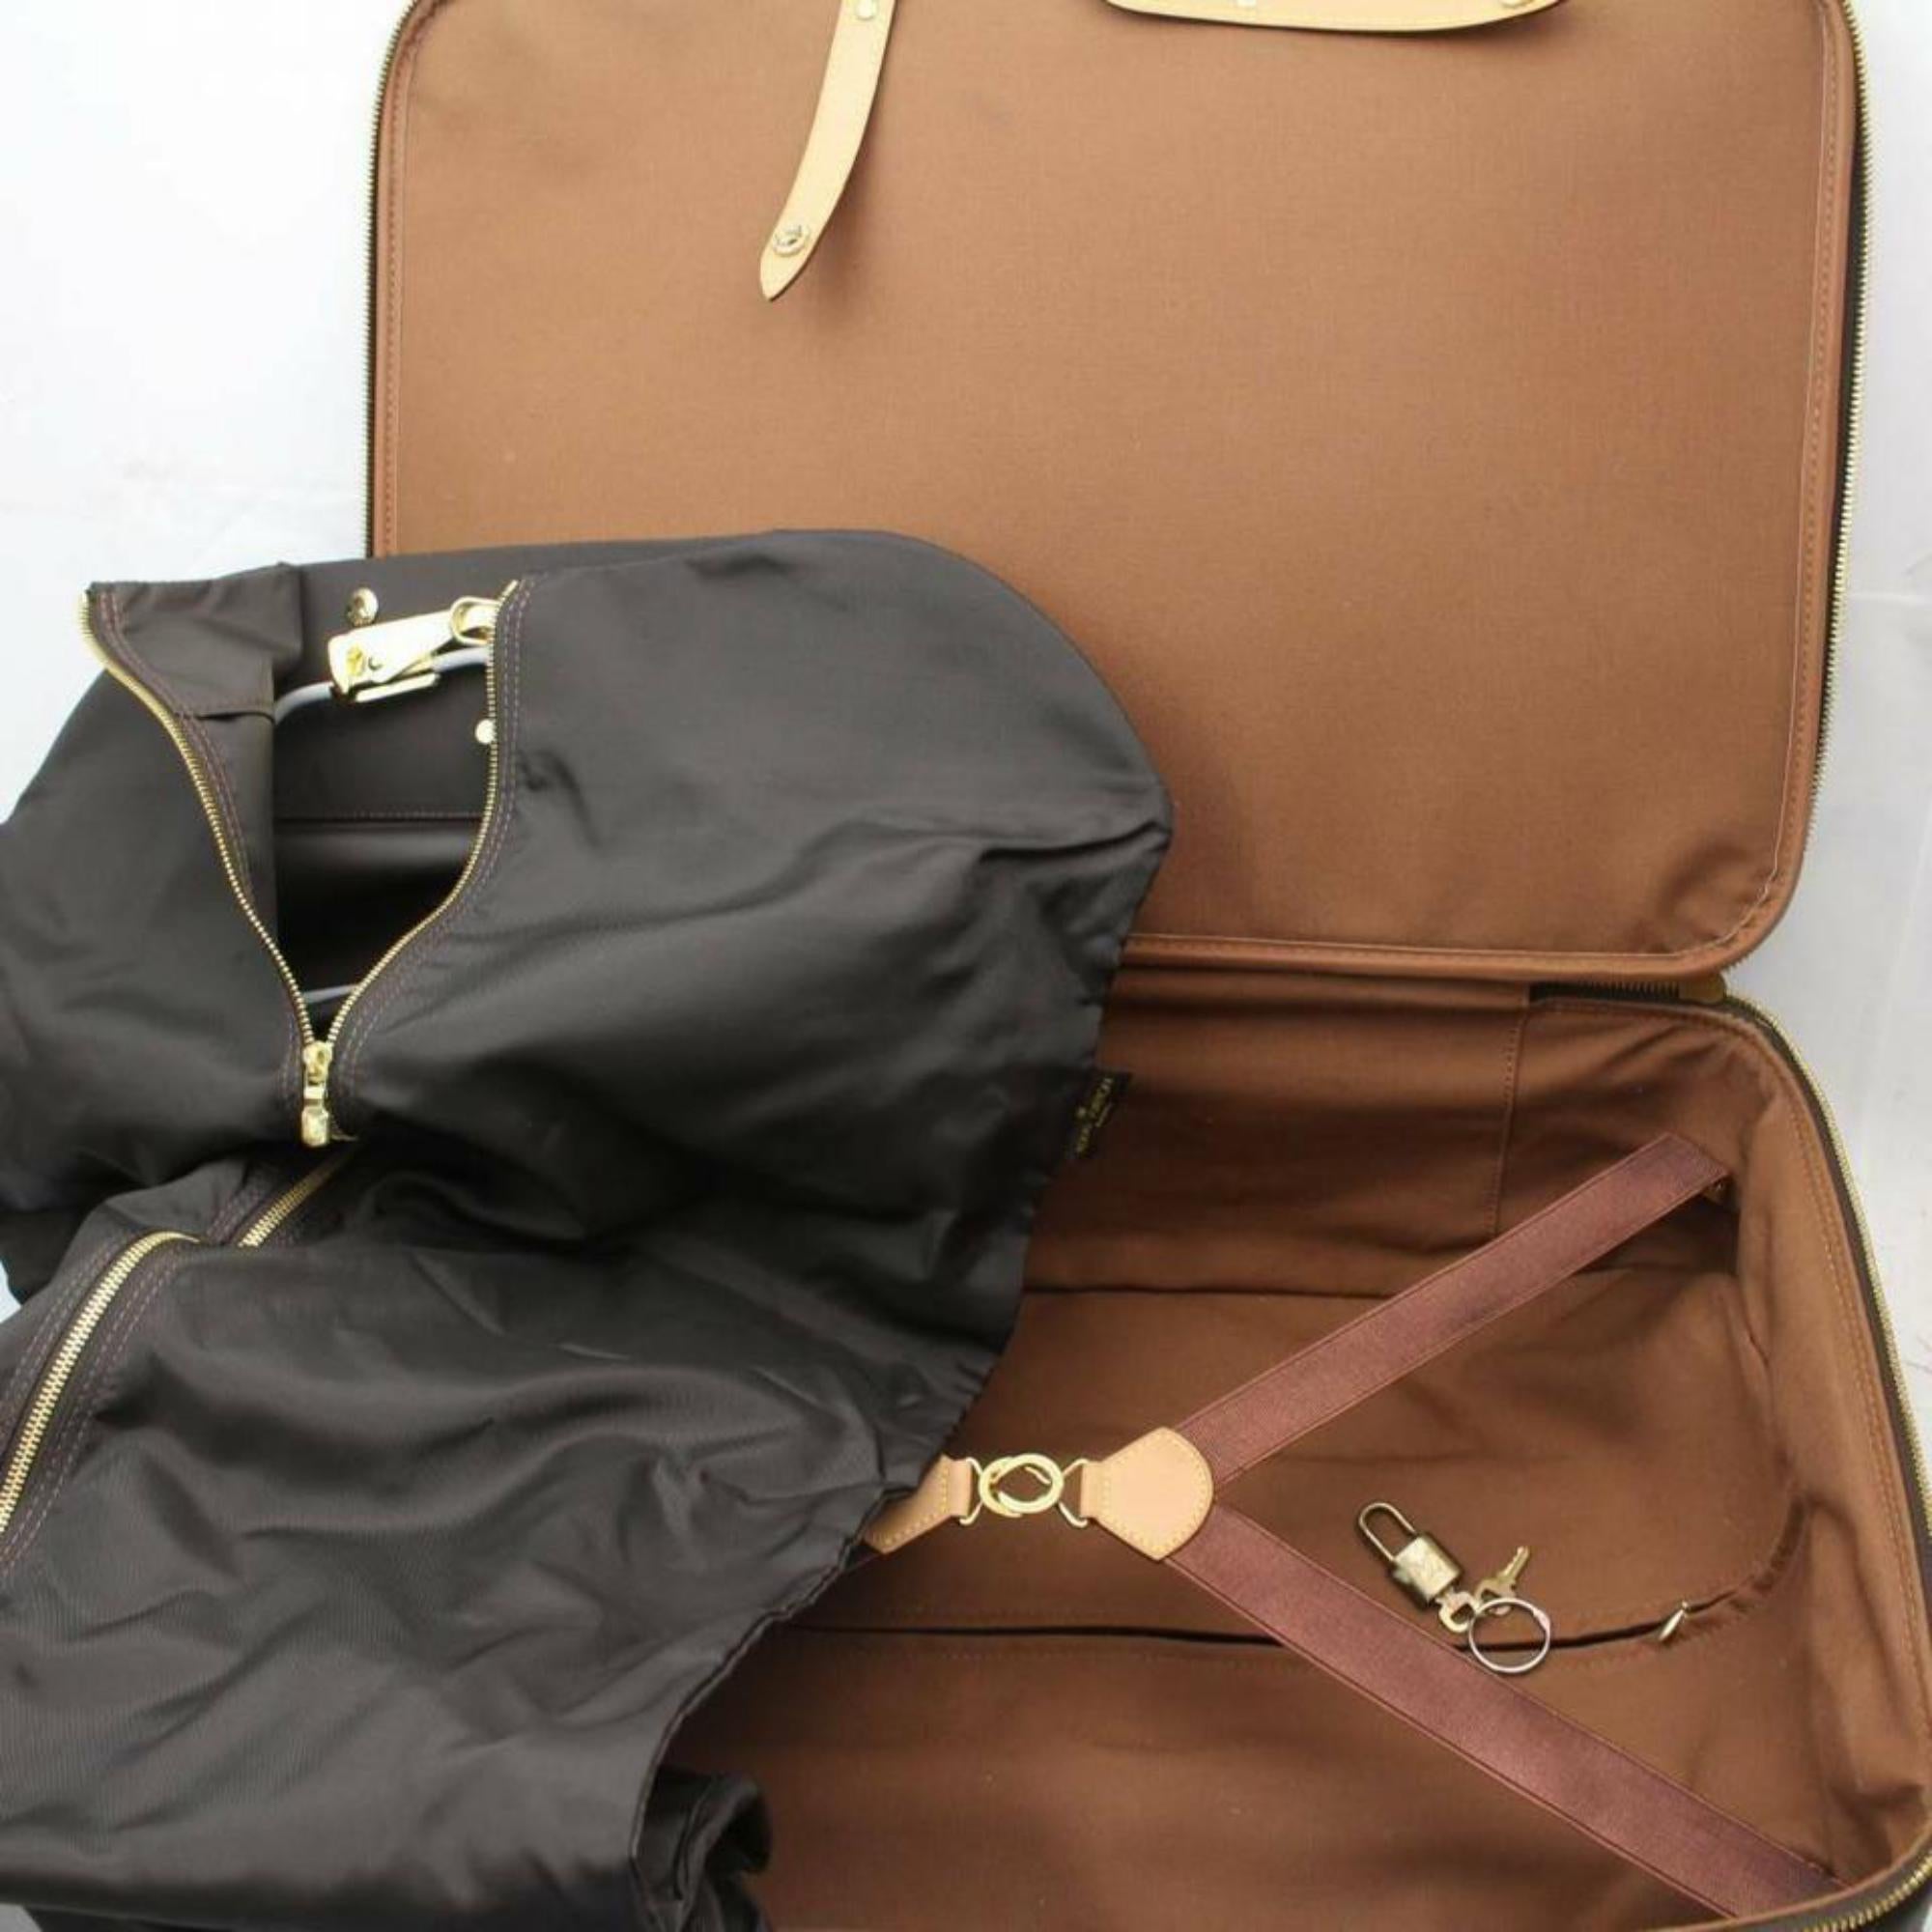 Black Louis Vuitton Garment Cover Rolling Luggage with 870298 Brown Canvas Travel Bag For Sale